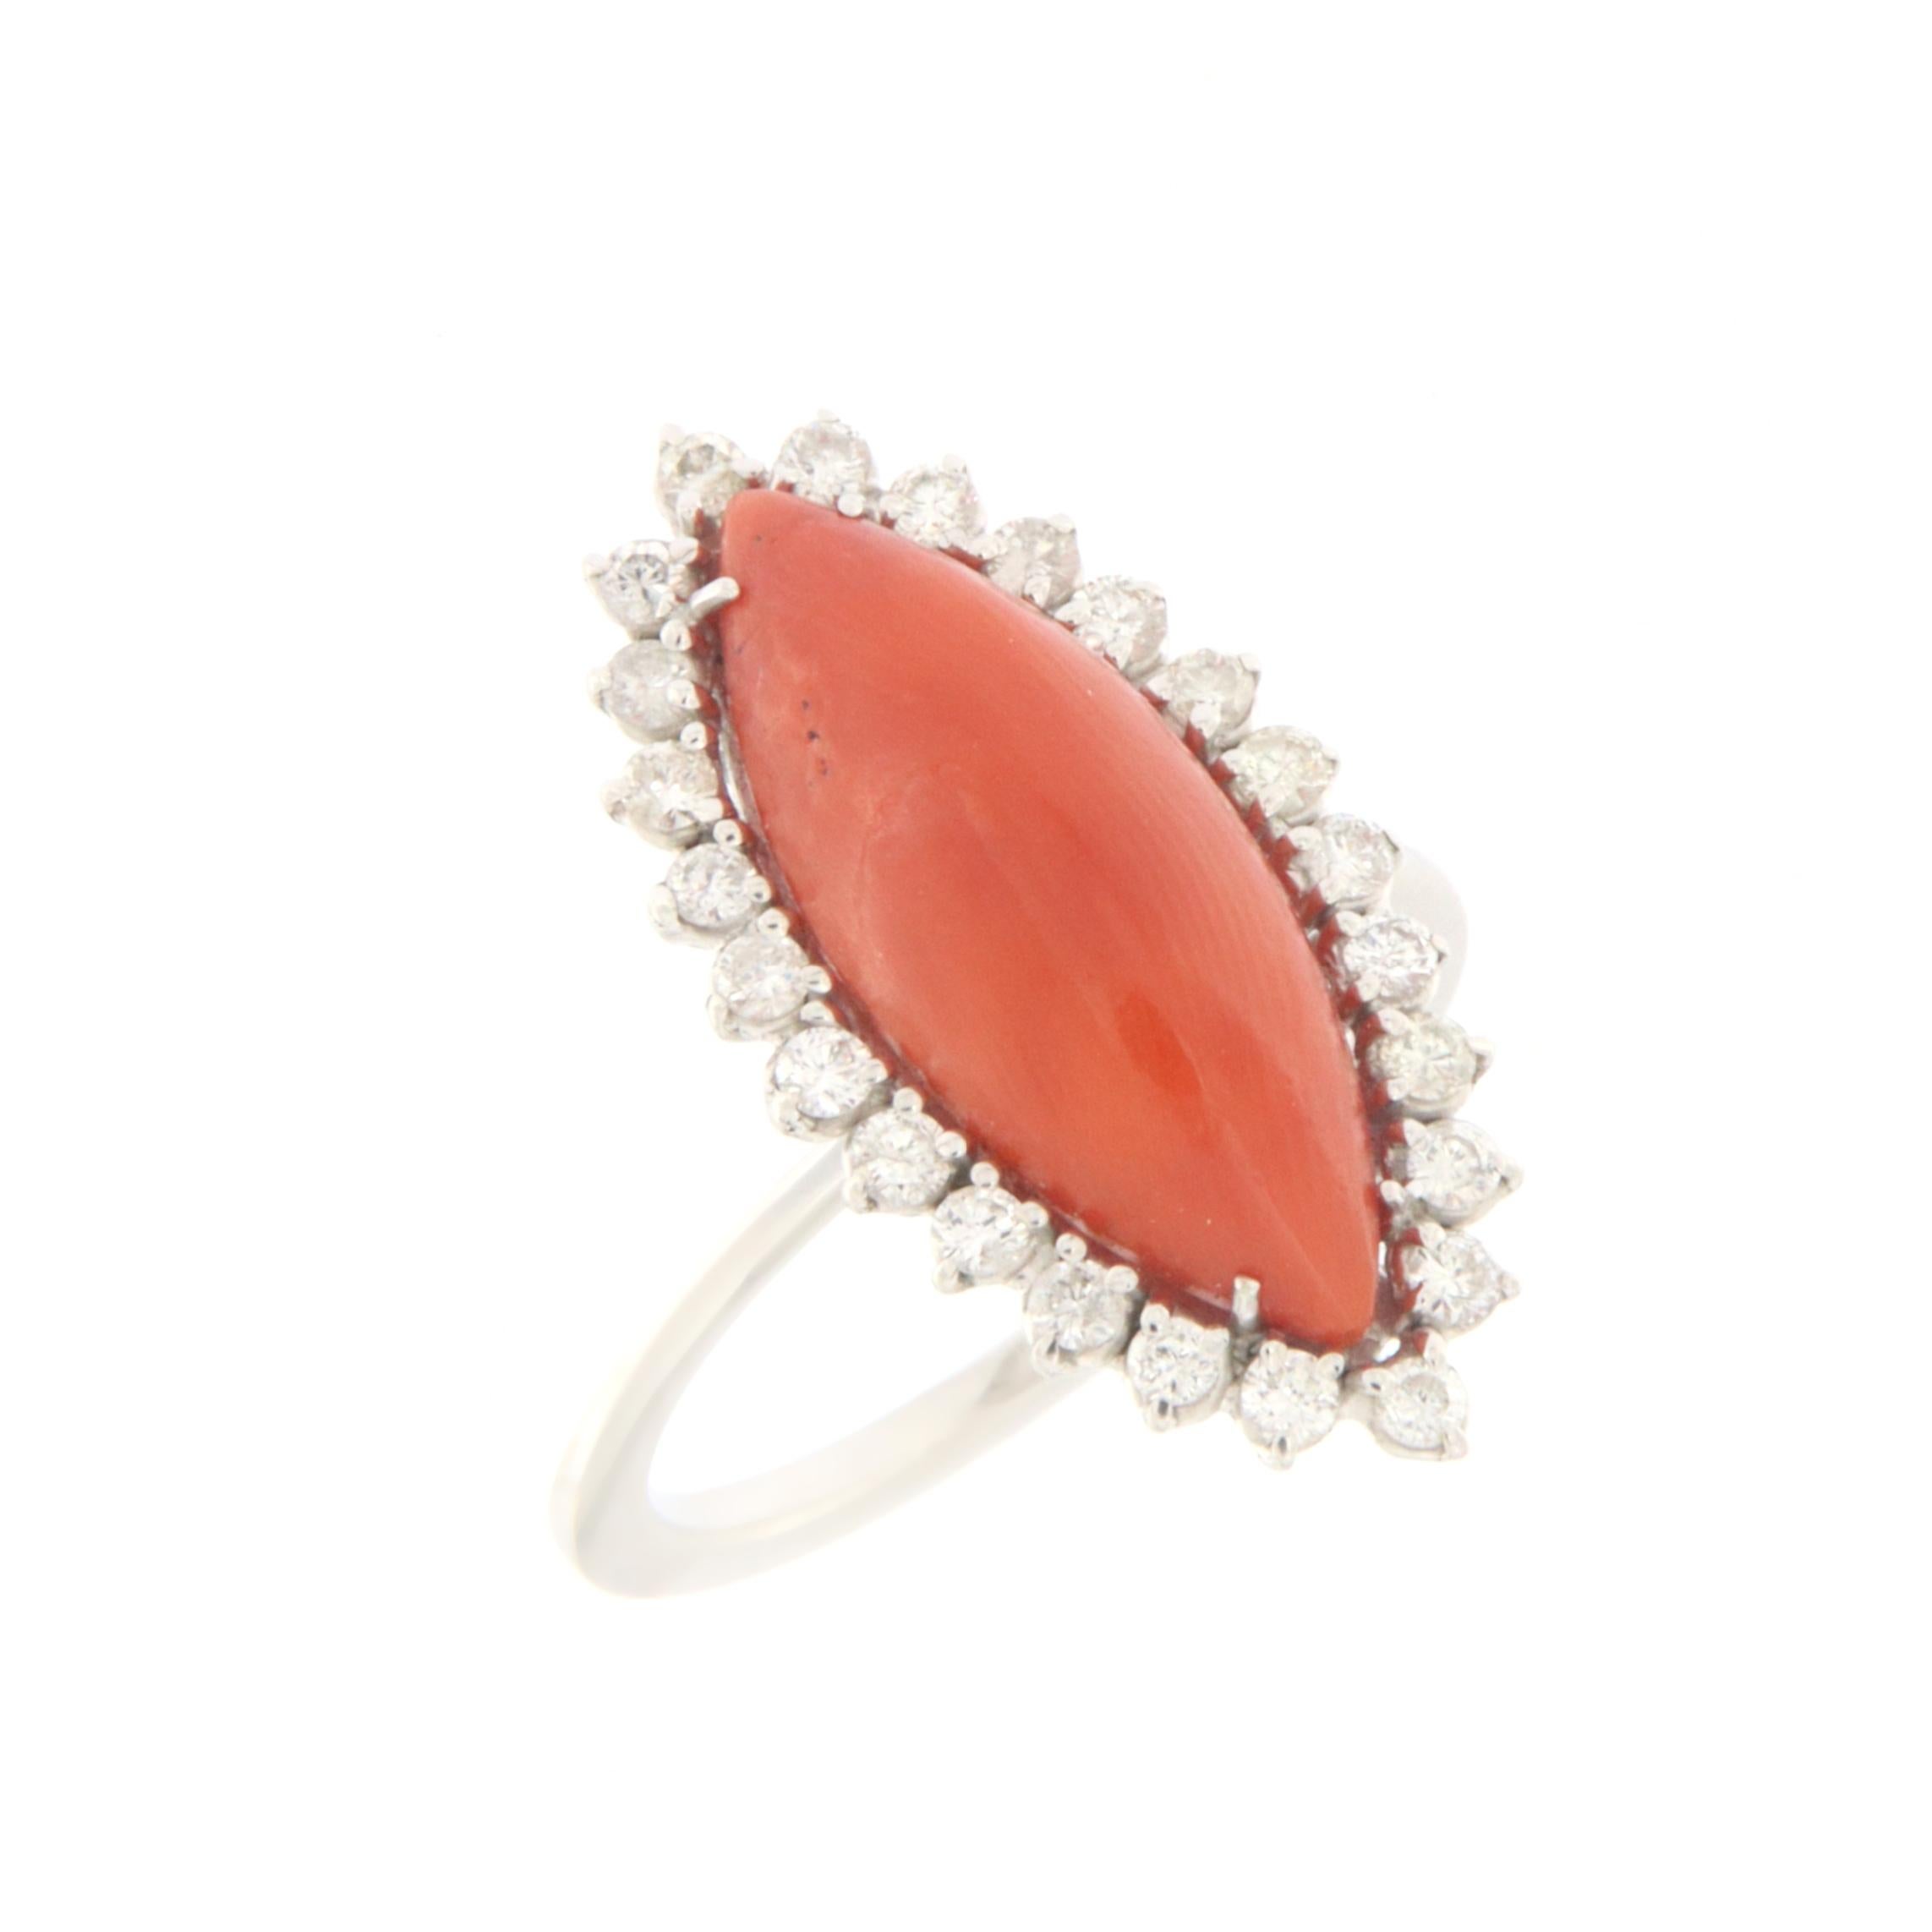 18 karat white gold cocktail ring. Handmade by our artisans assembled with diamonds and natural coral

Diamonds weight 0.54 karat
Coral weight 1.10 grams
Ring total weight 6 grams
Ring size 8.10 US 17.50 Ita
(all rings are can be resized)